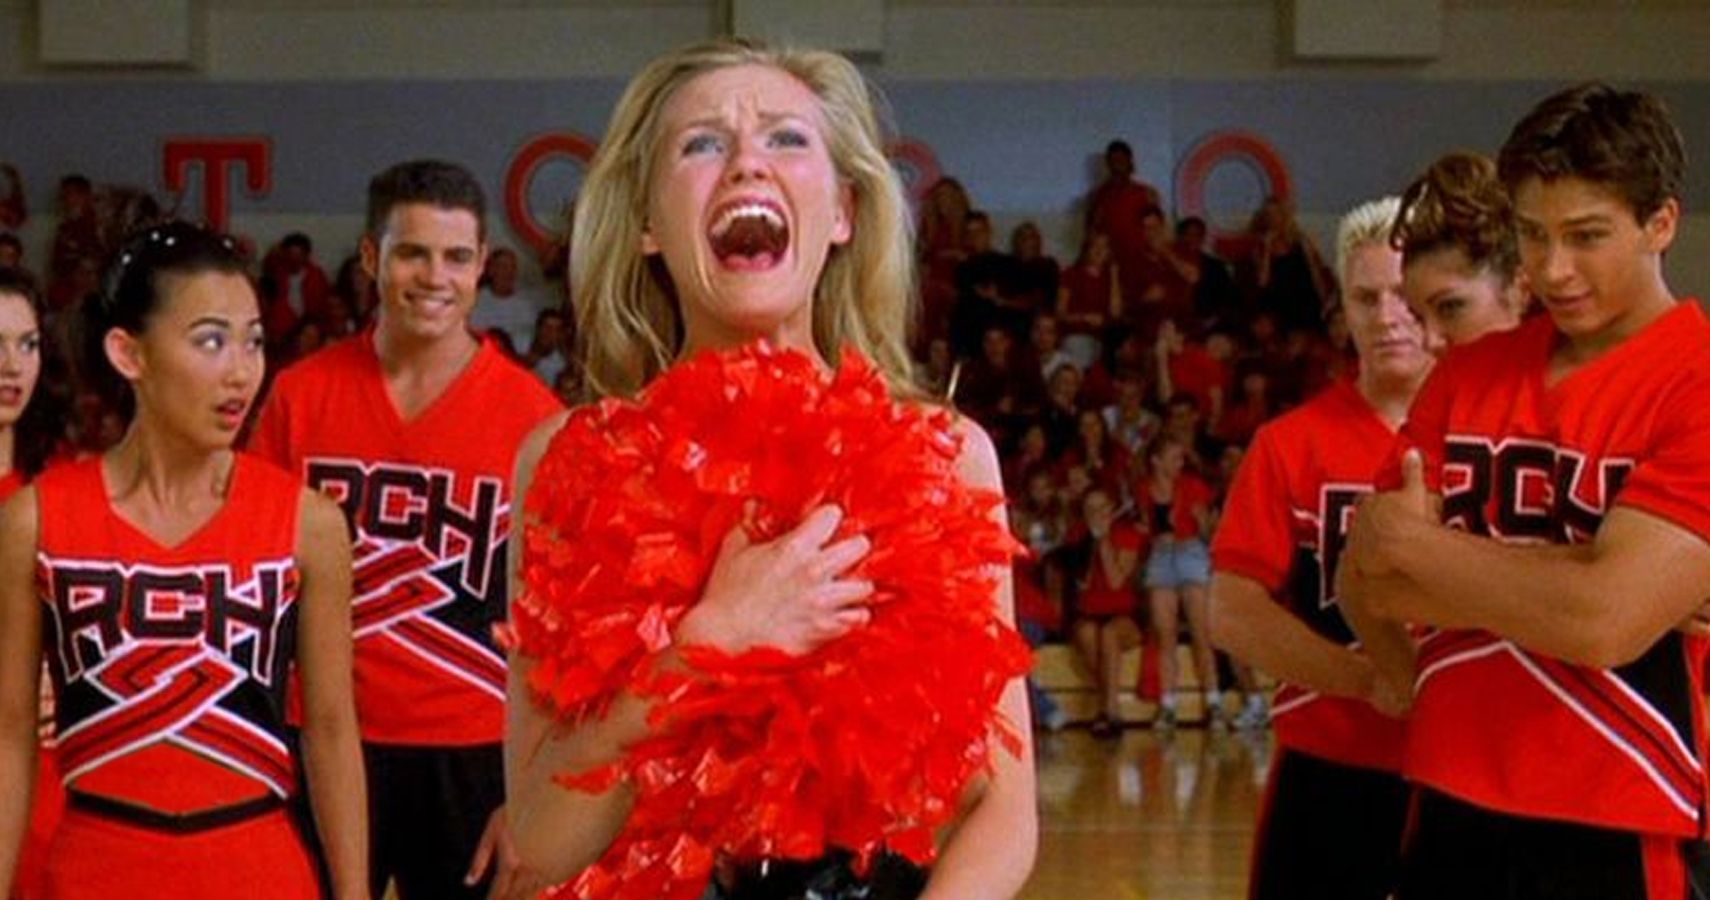 25 Behind The Scenes Things Only True Fans Know About Bring It On